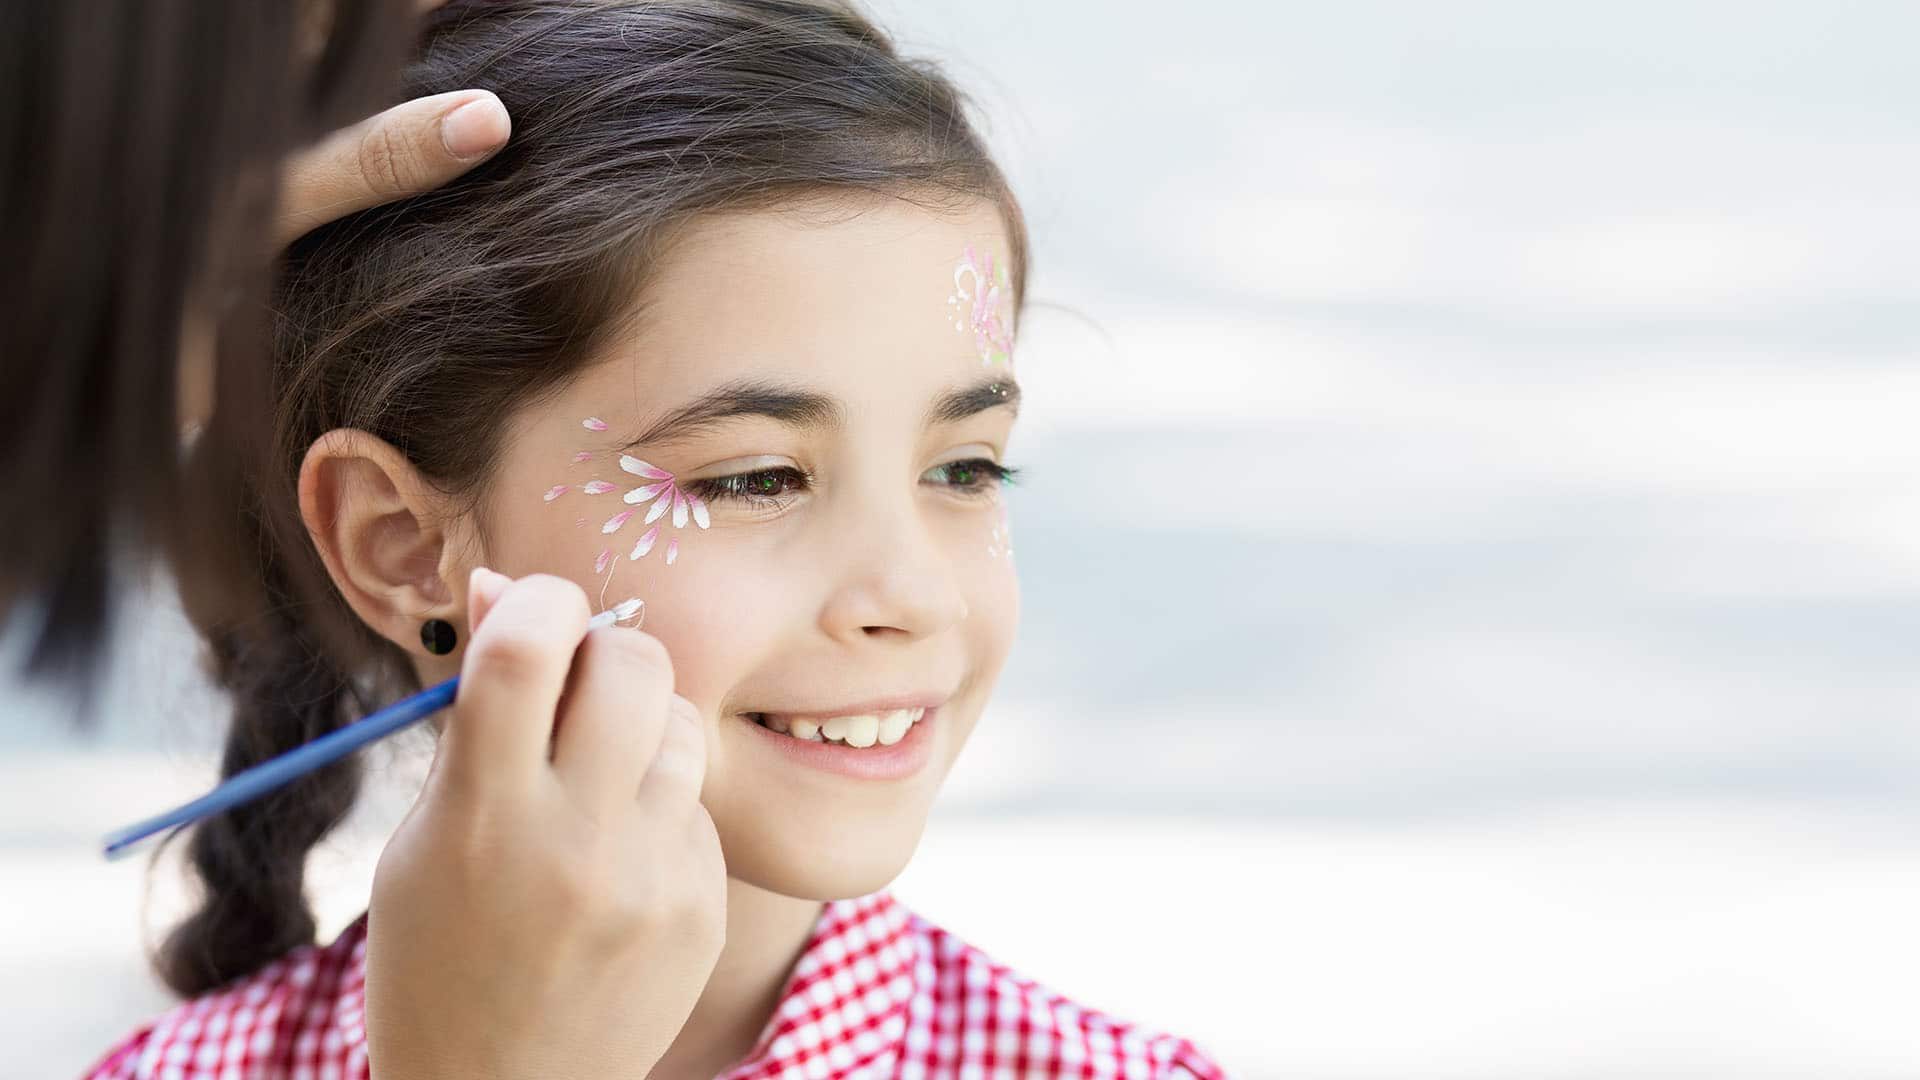 Cute happy girl getting floral face painting outdoors, copy space